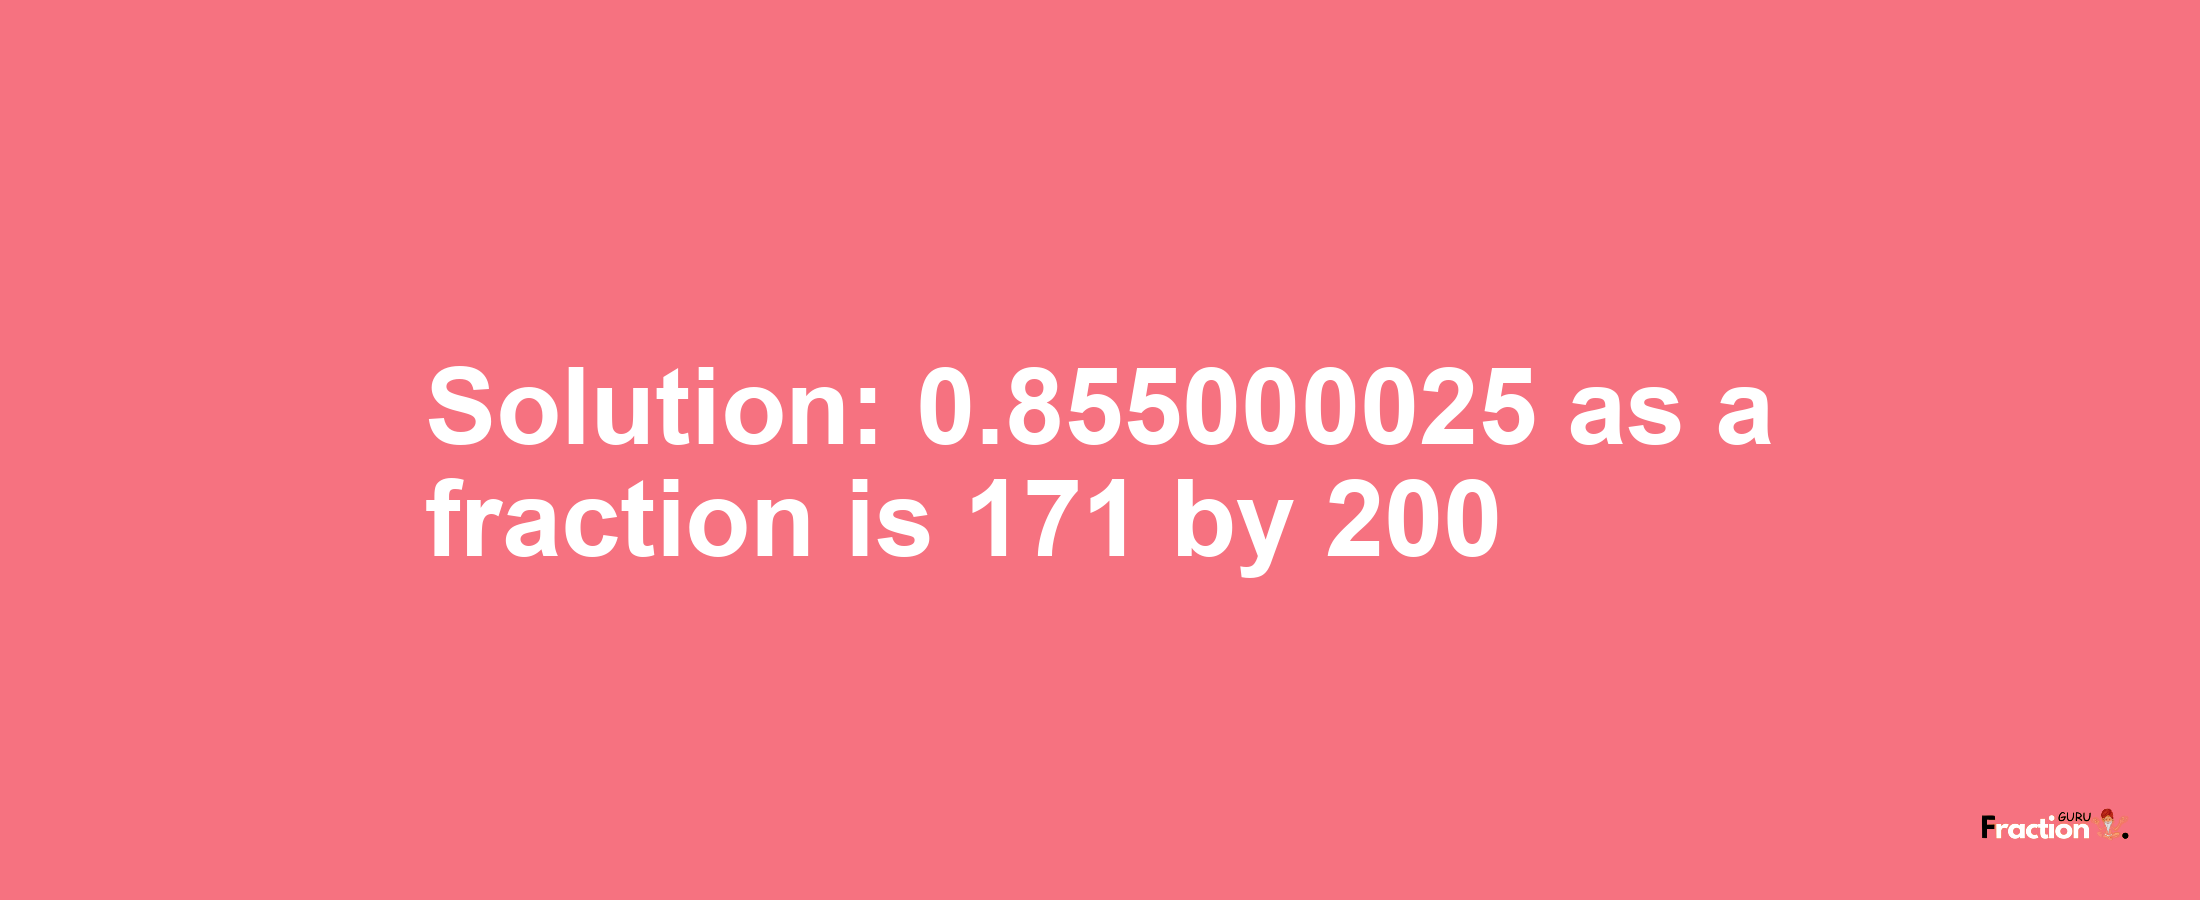 Solution:0.855000025 as a fraction is 171/200